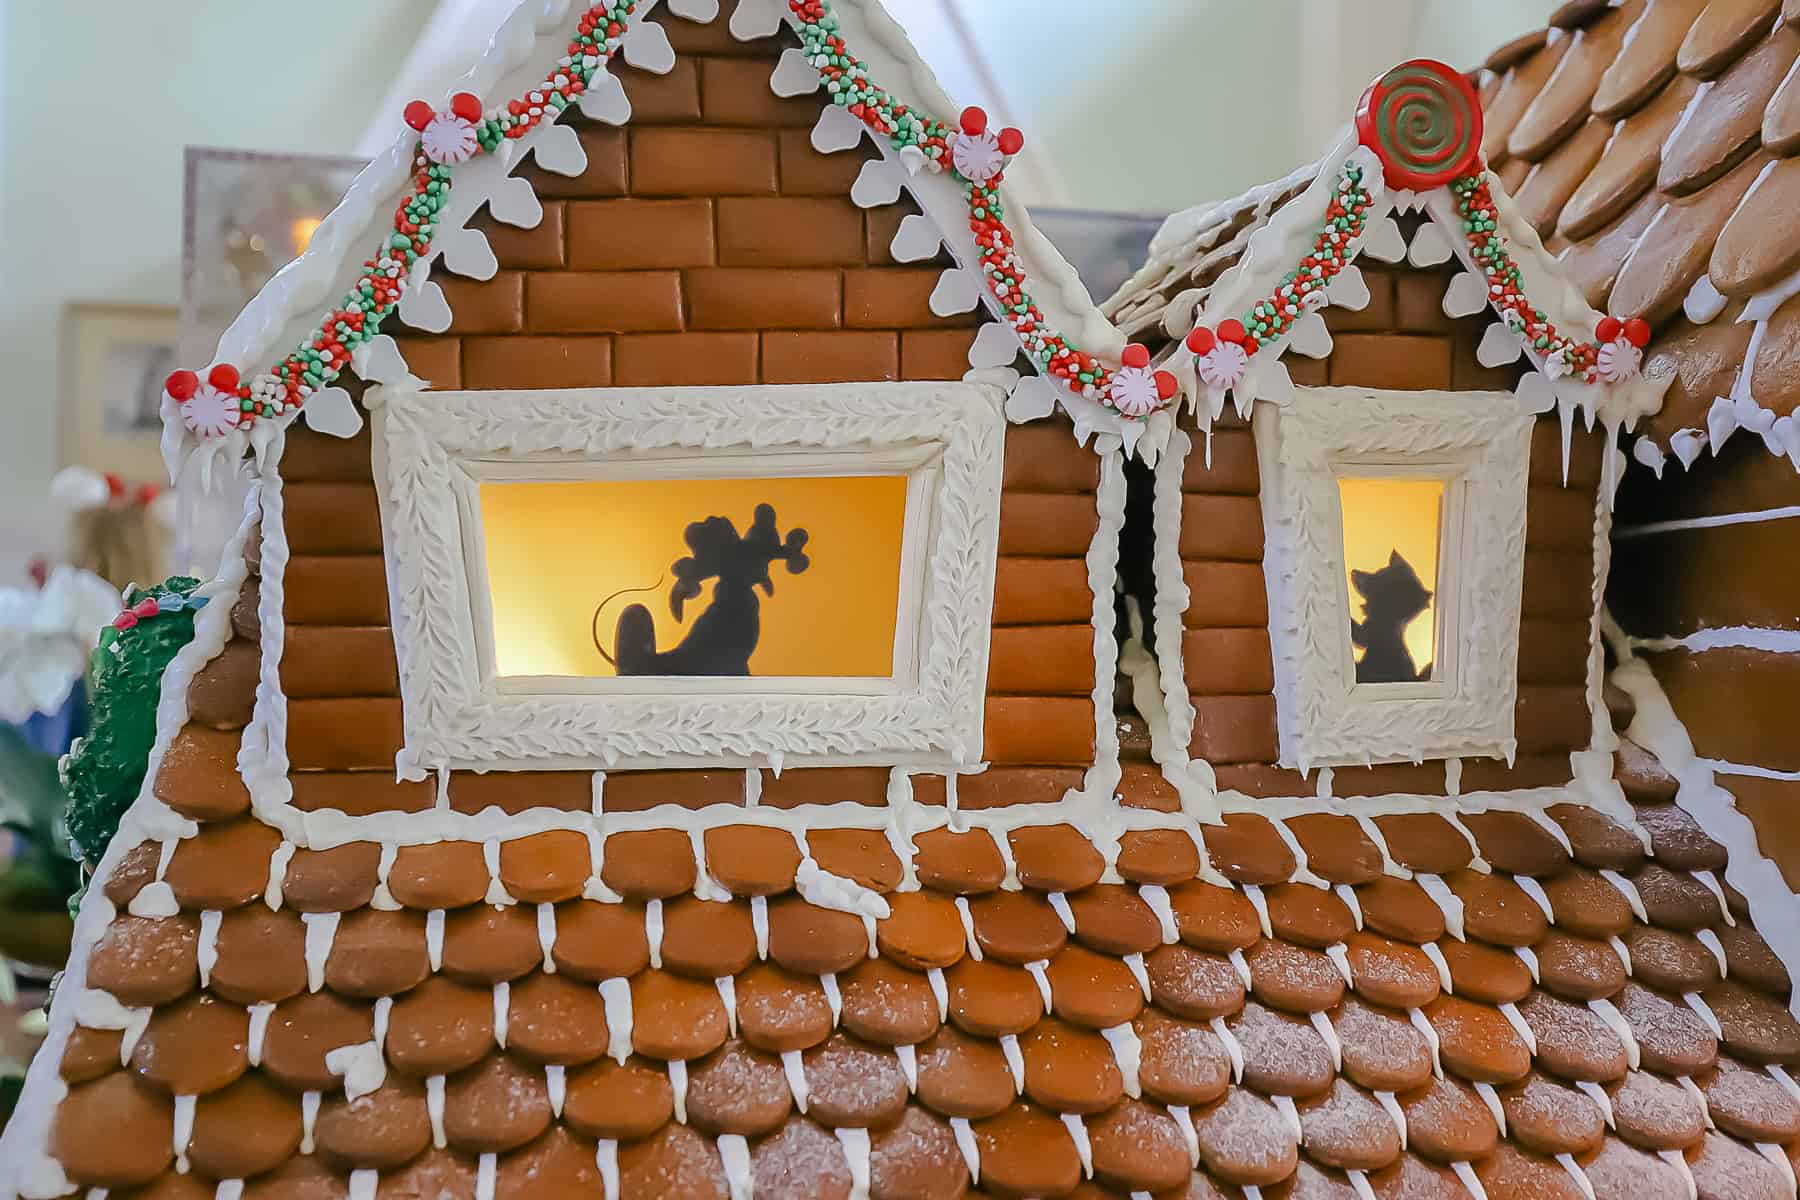 Silhouettes of Pluto and Figaro in the Boardwalk Inn's gingerbread house 